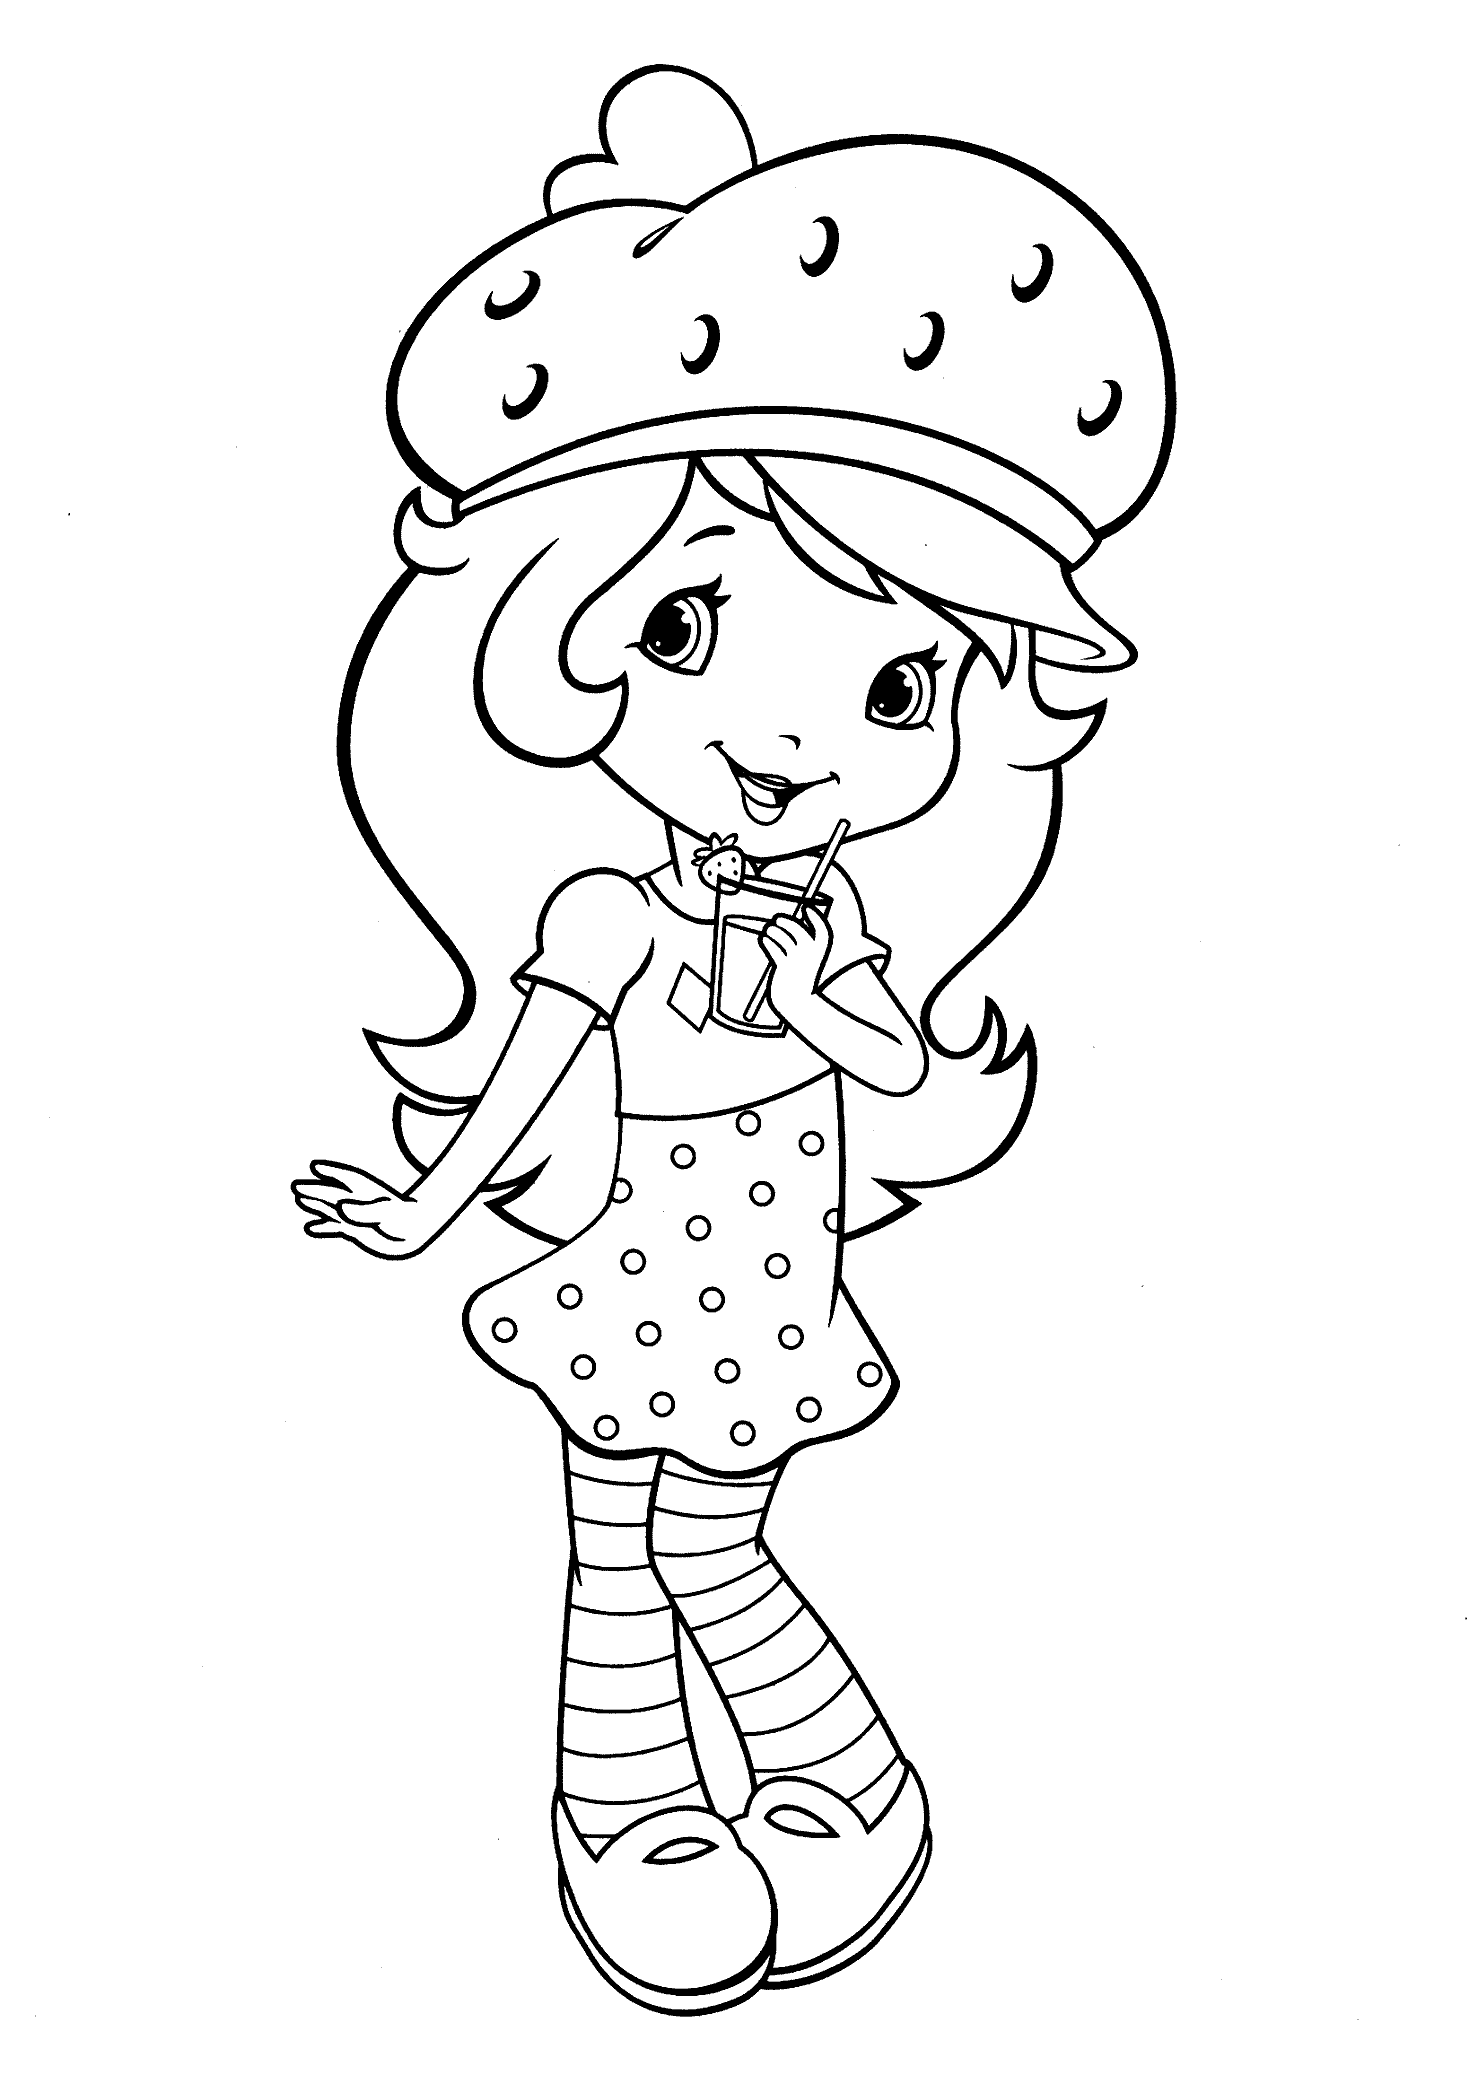 strawberry shortcake colouring pictures strawberry shortcake coloring pages coloring pages strawberry shortcake pictures colouring 